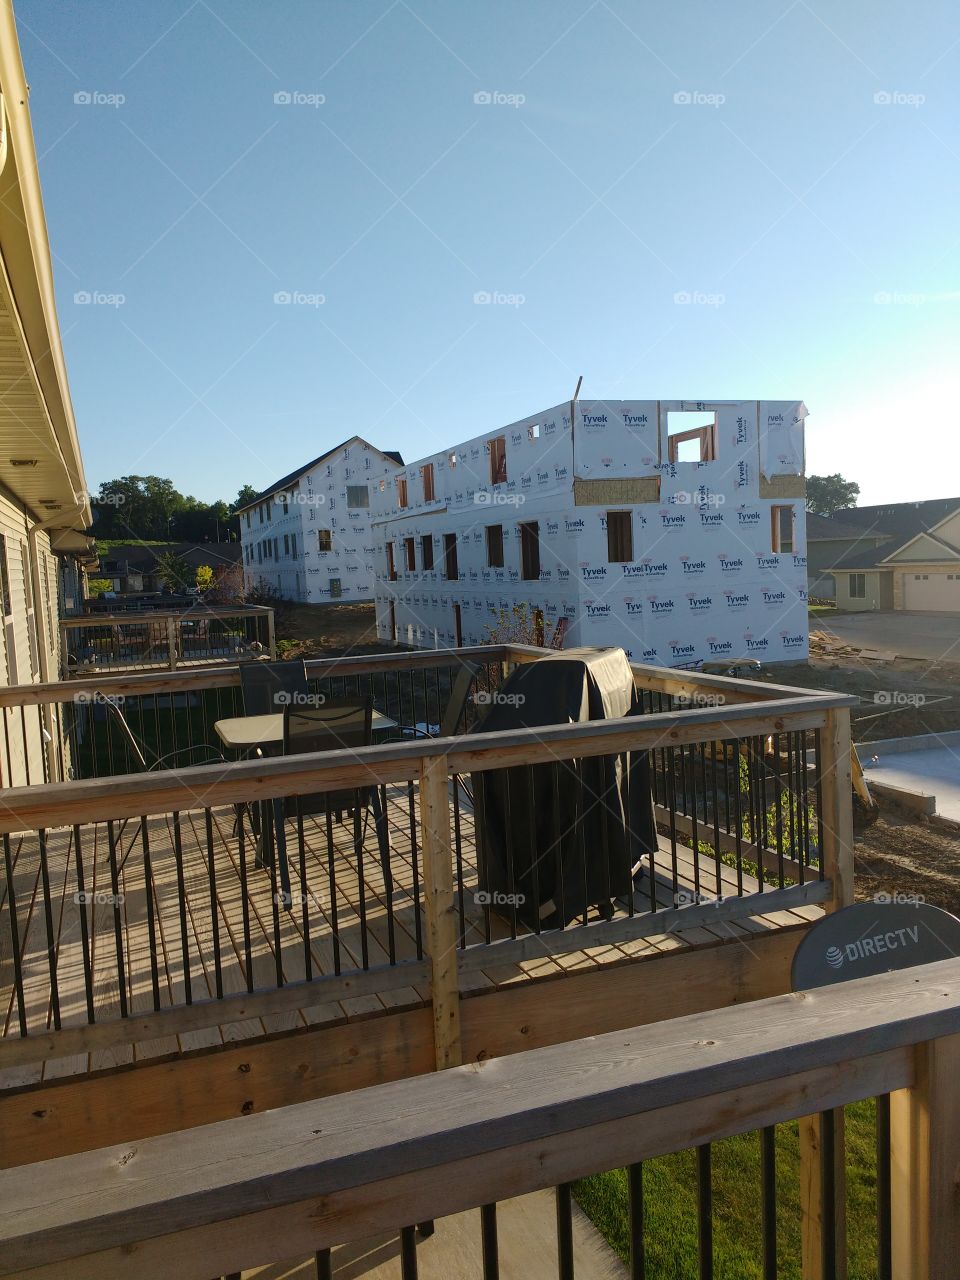 new houses (condos) going up.